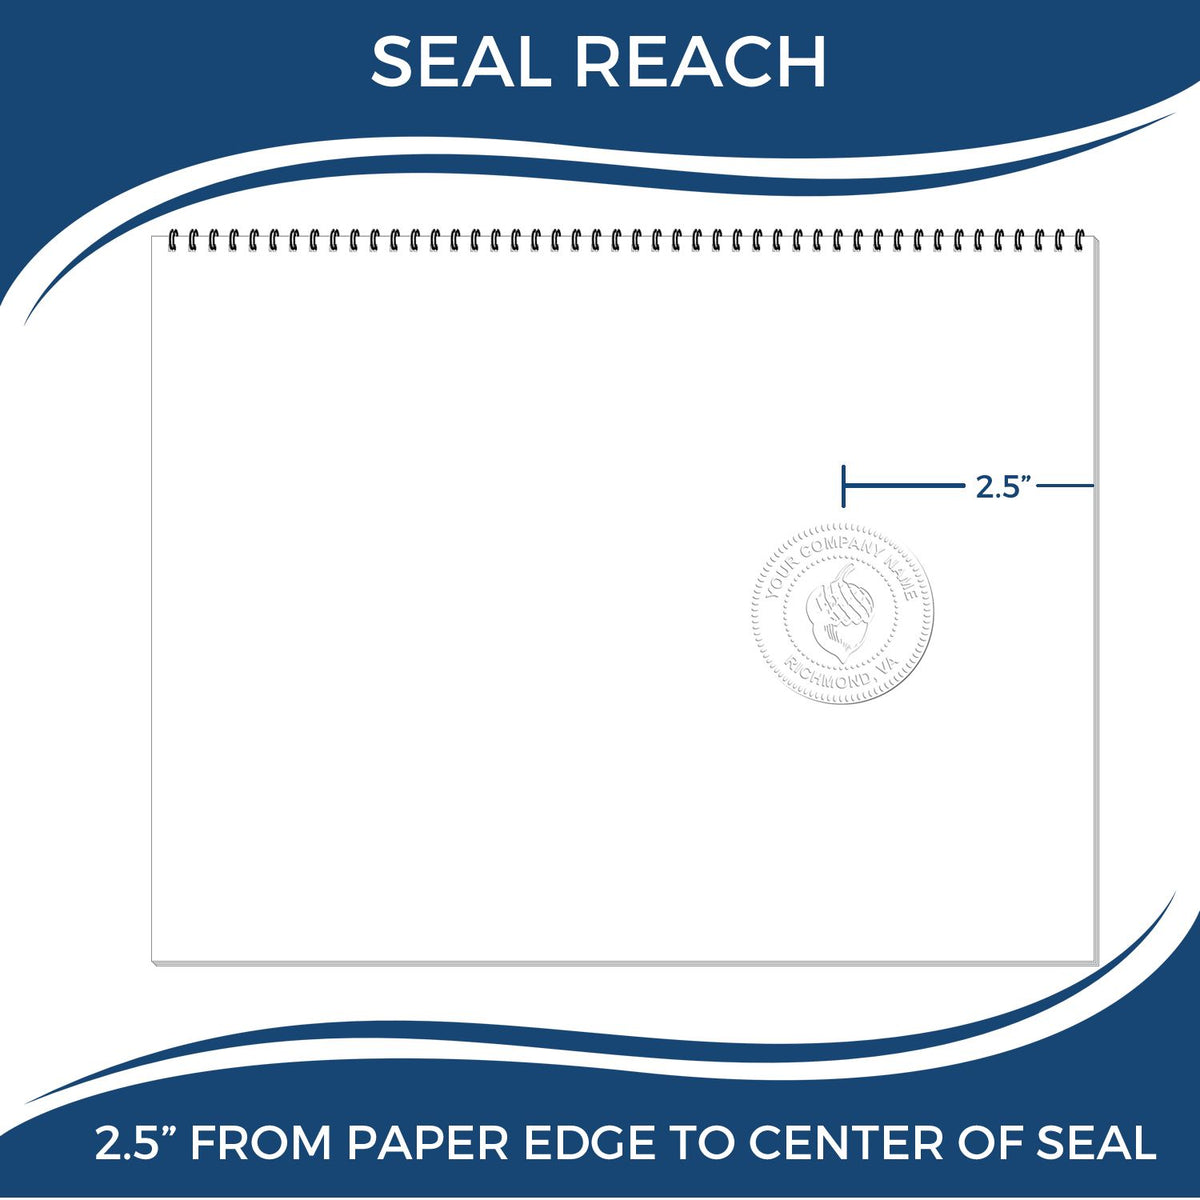 An infographic showing the seal reach which is represented by a ruler and a miniature seal image of the Heavy Duty Cast Iron North Dakota Architect Embosser